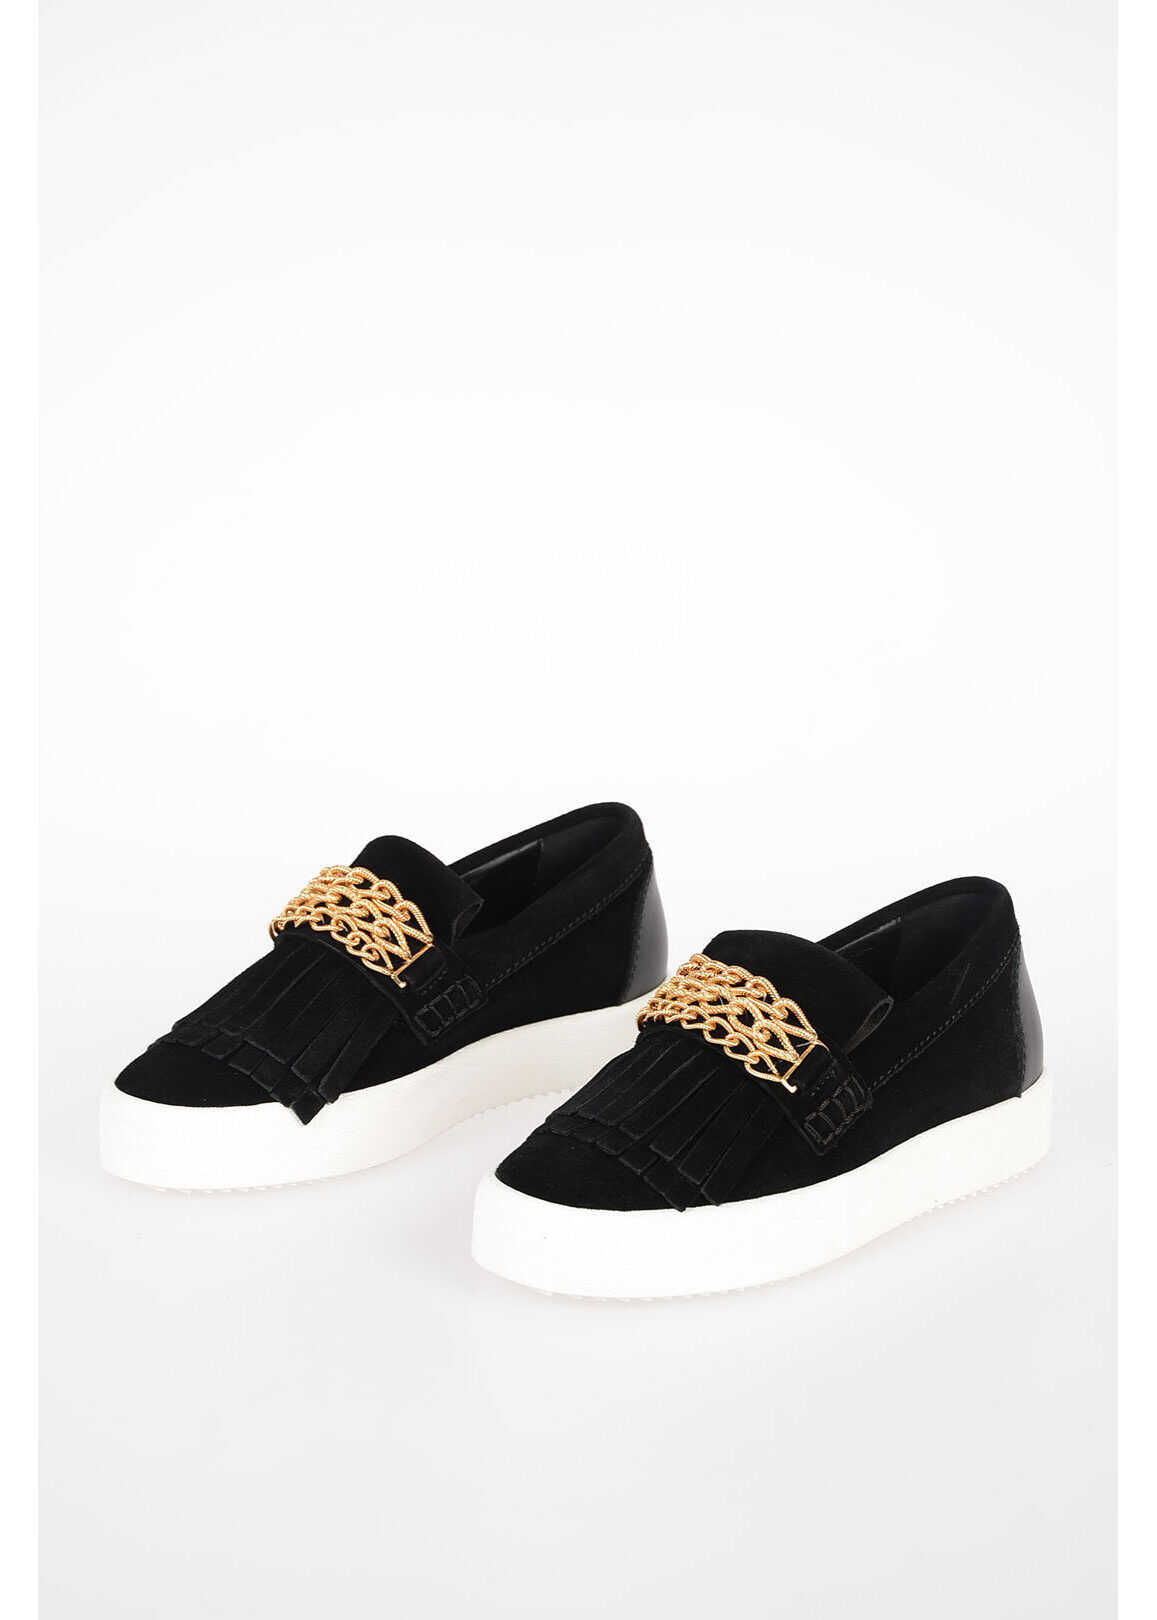 Giuseppe Zanotti Suede Slip On Sneakers with gold tone Chain* BLACK